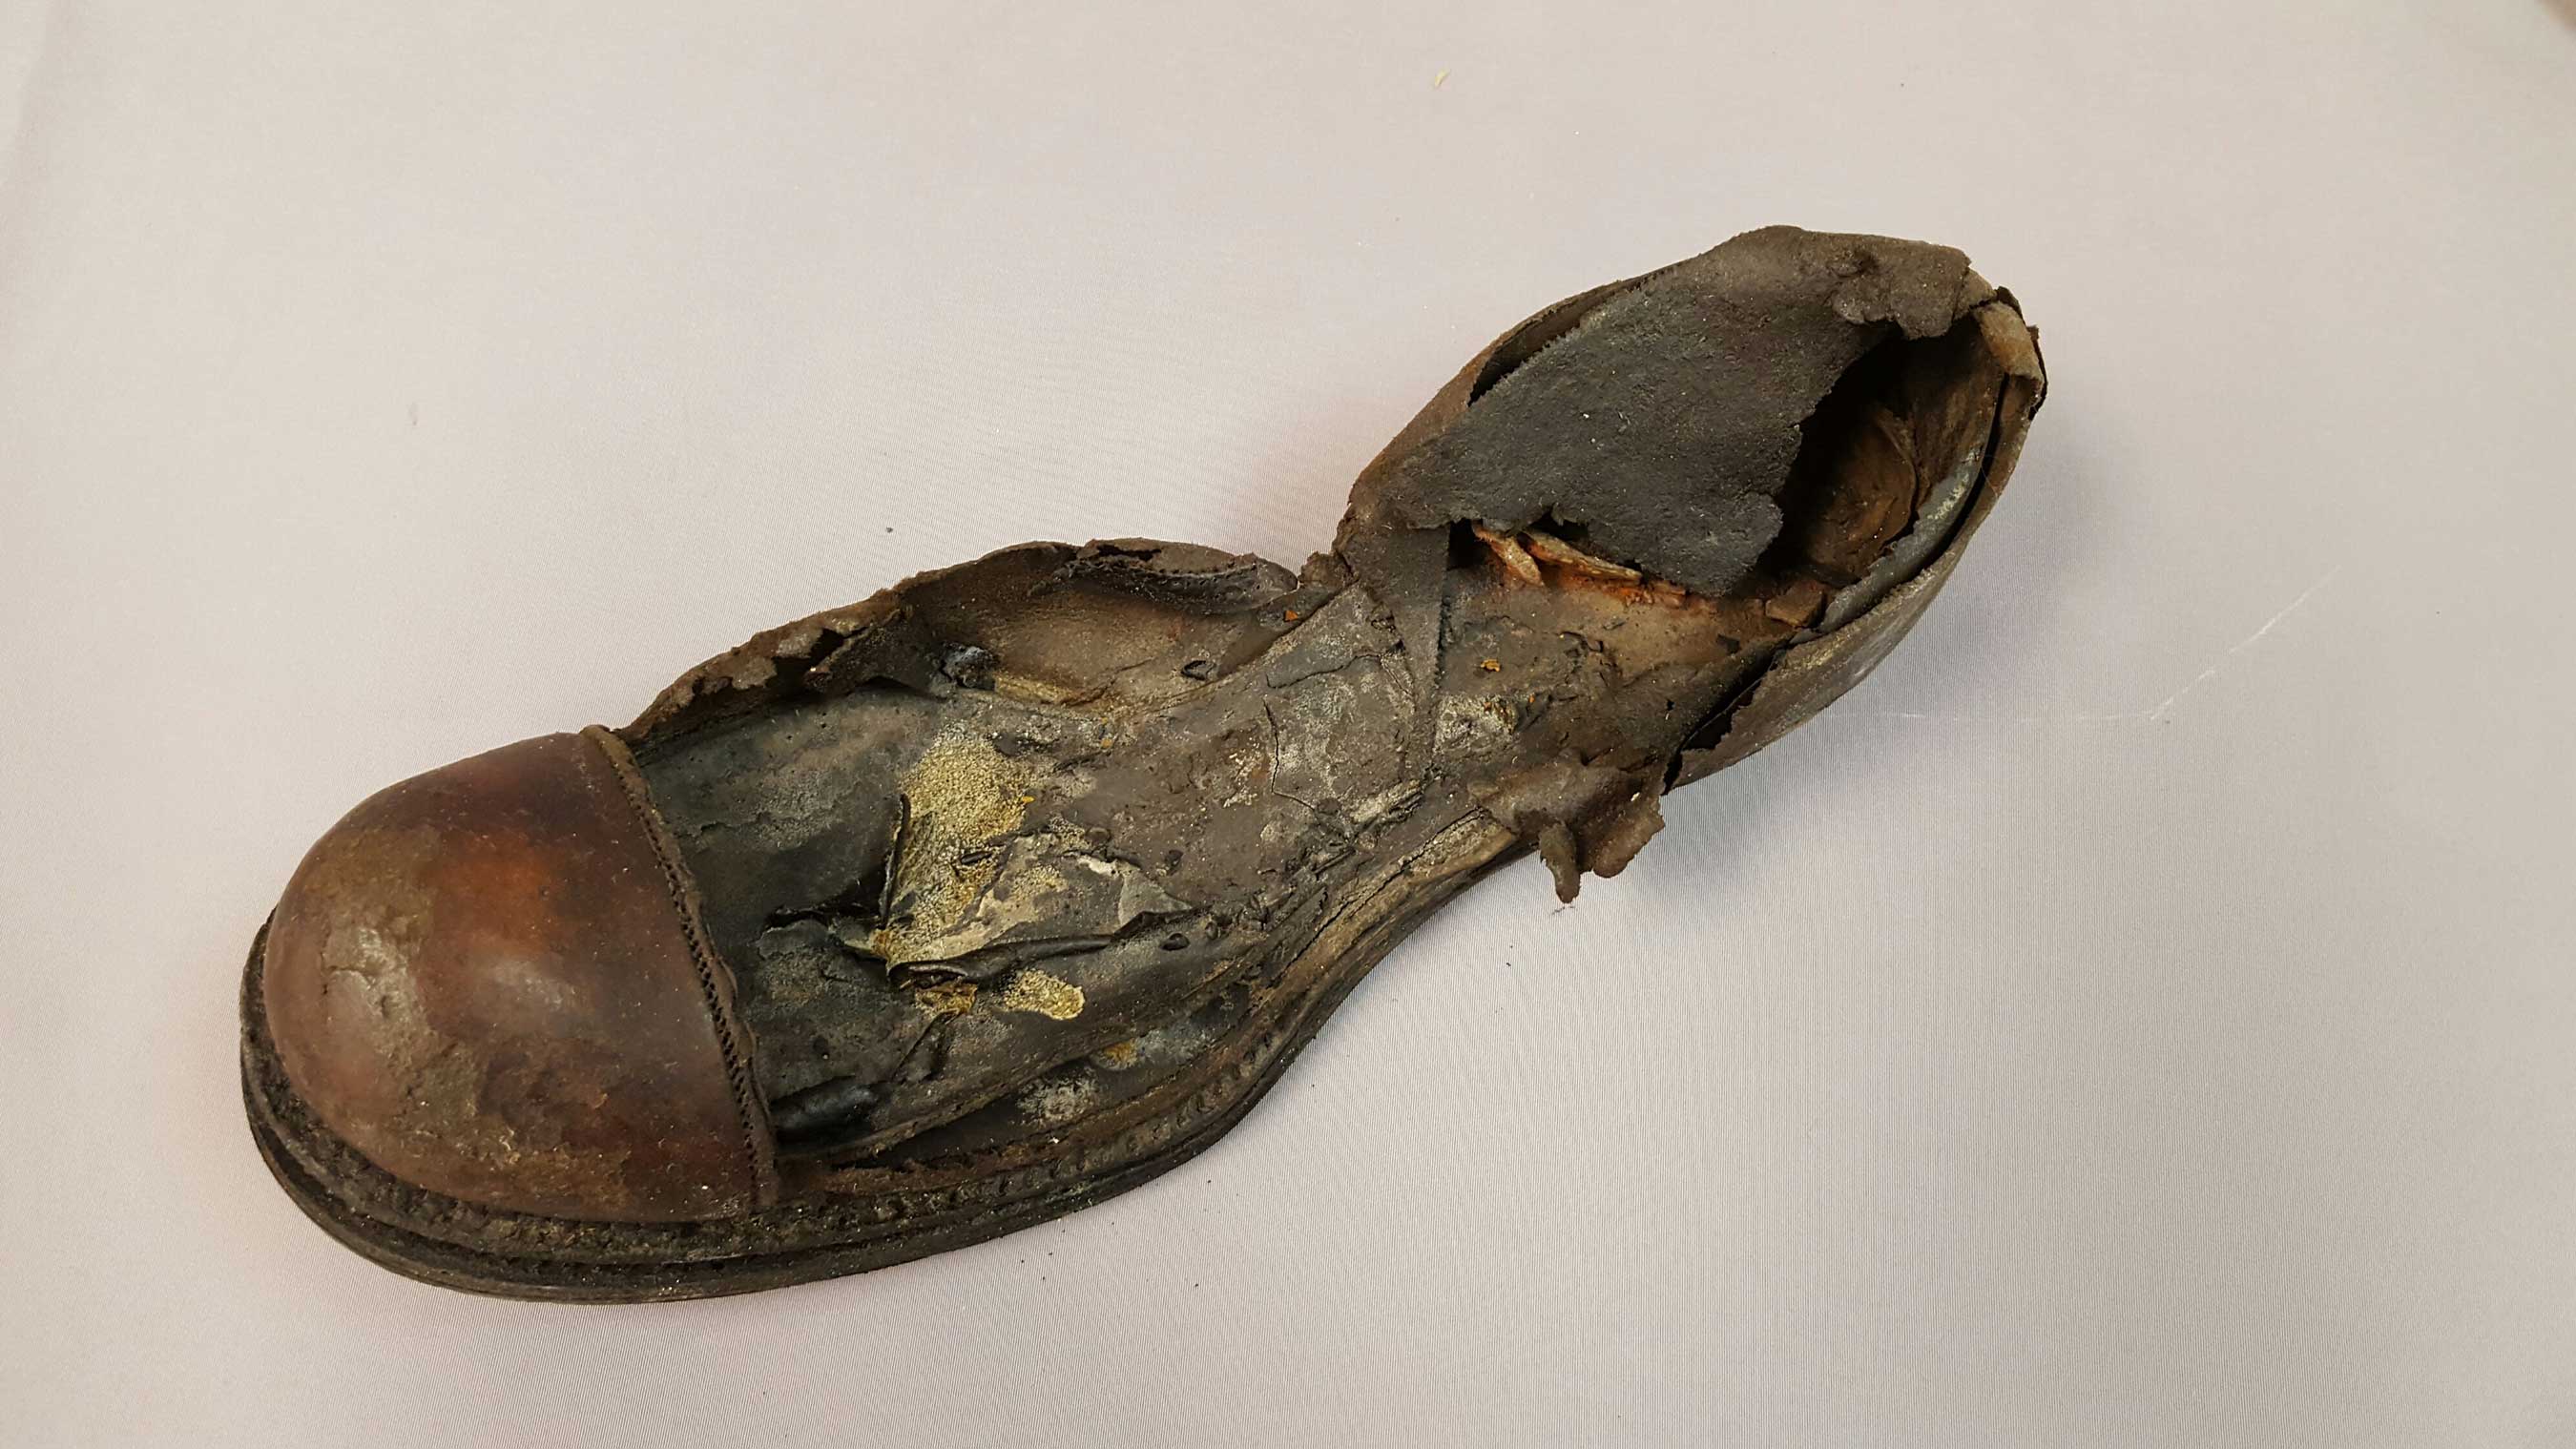 This men's leather shoe fragment consists of the welt, top cap and partial quarter with the insole. This shoe has never been previously exhibited due to its fragile condition. (Credit Premier Exhibitions)